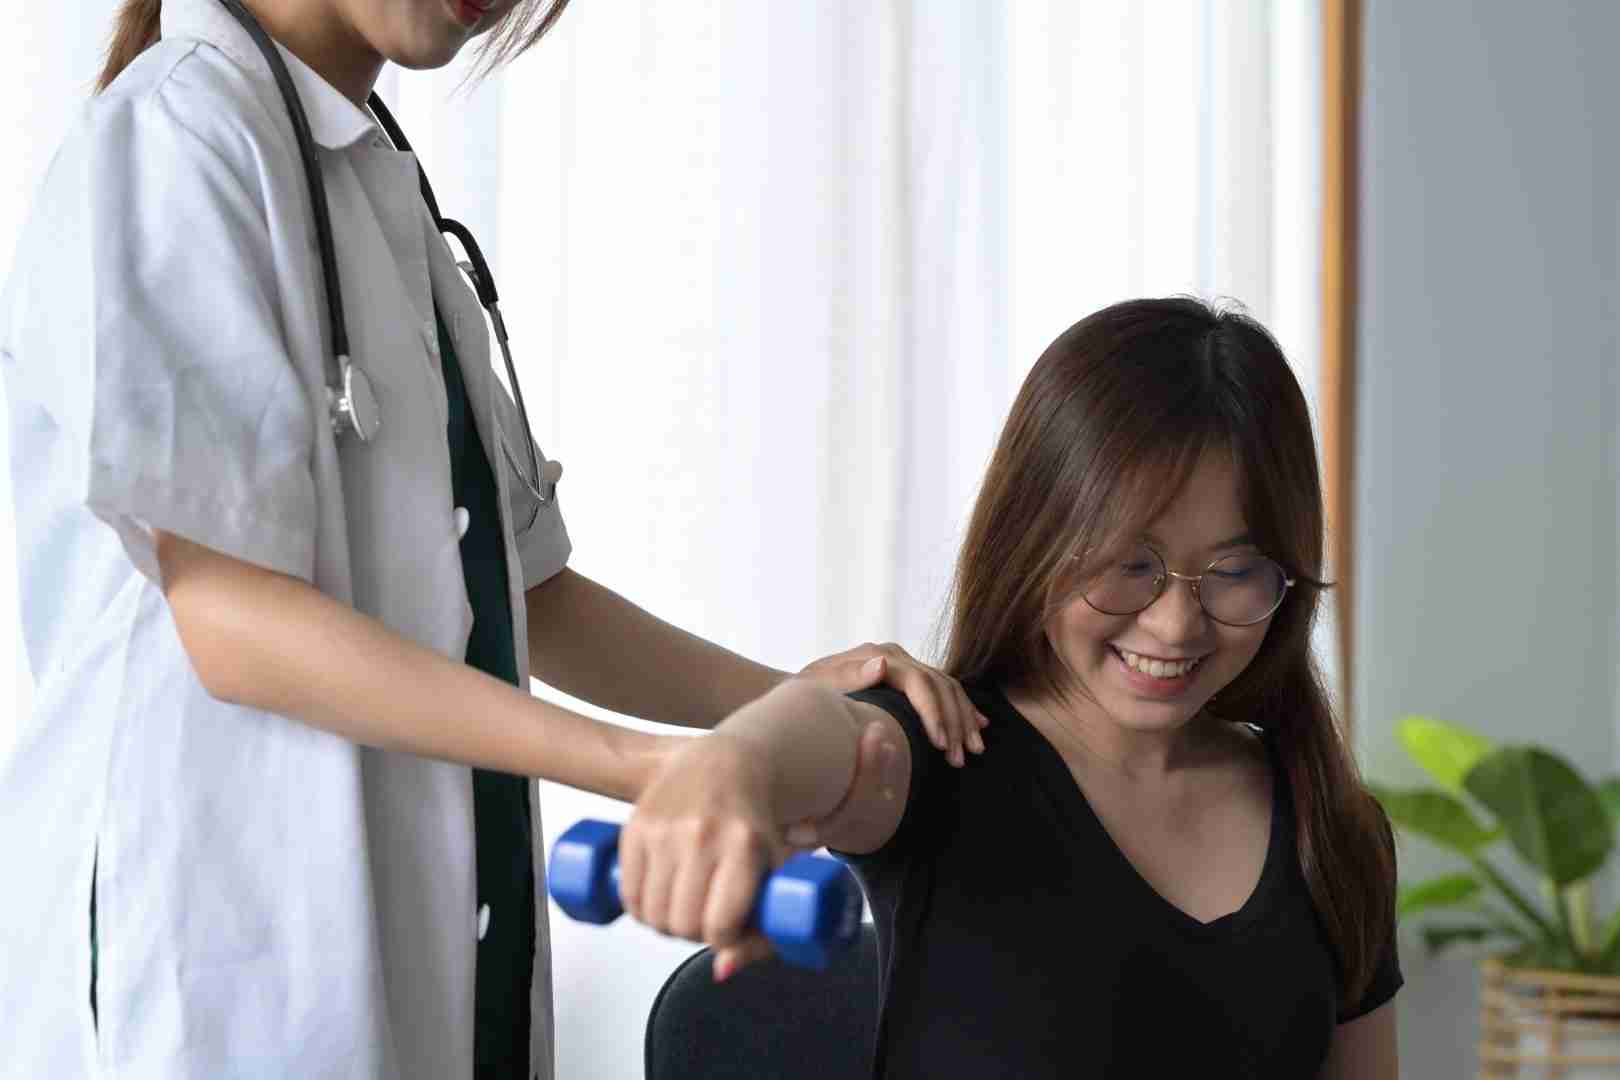 A healthcare professional from Austin Manual Therapy Associates assists a smiling woman with physical therapy exercises. The woman, wearing glasses and a black shirt, holds a blue dumbbell while the professional guides her arm. The setting appears to be a medical or rehabilitation clinic.